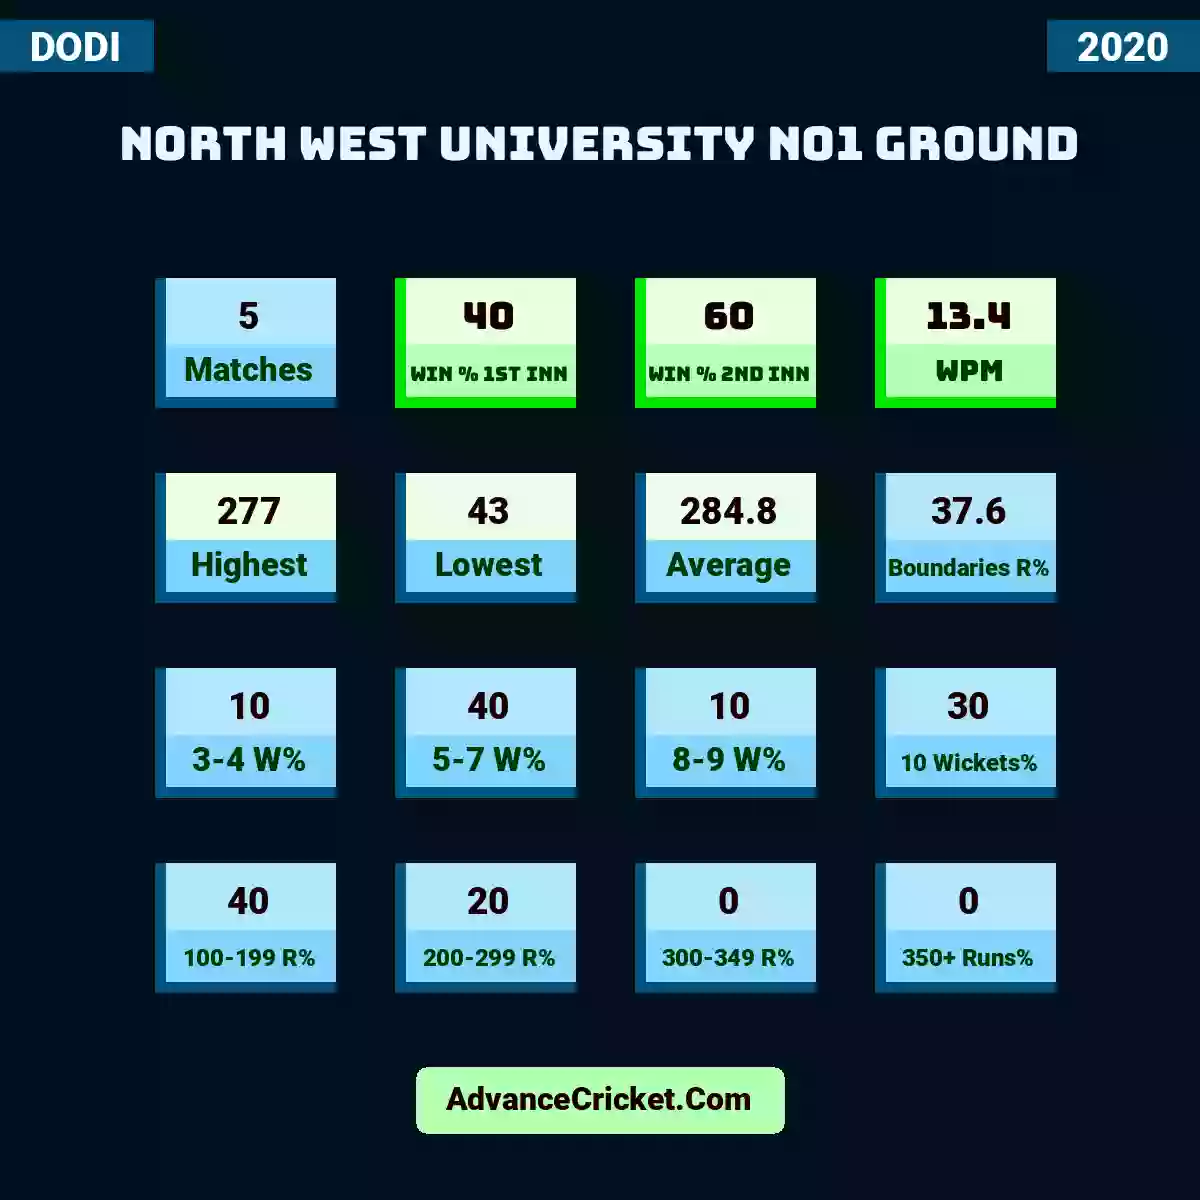 Image showing North West University No1 Ground with Matches: 5, Win % 1st Inn: 40, Win % 2nd Inn: 60, WPM: 13.4, Highest: 277, Lowest: 43, Average: 284.8, Boundaries R%: 37.6, 3-4 W%: 10, 5-7 W%: 40, 8-9 W%: 10, 10 Wickets%: 30, 100-199 R%: 40, 200-299 R%: 20, 300-349 R%: 0, 350+ Runs%: 0.